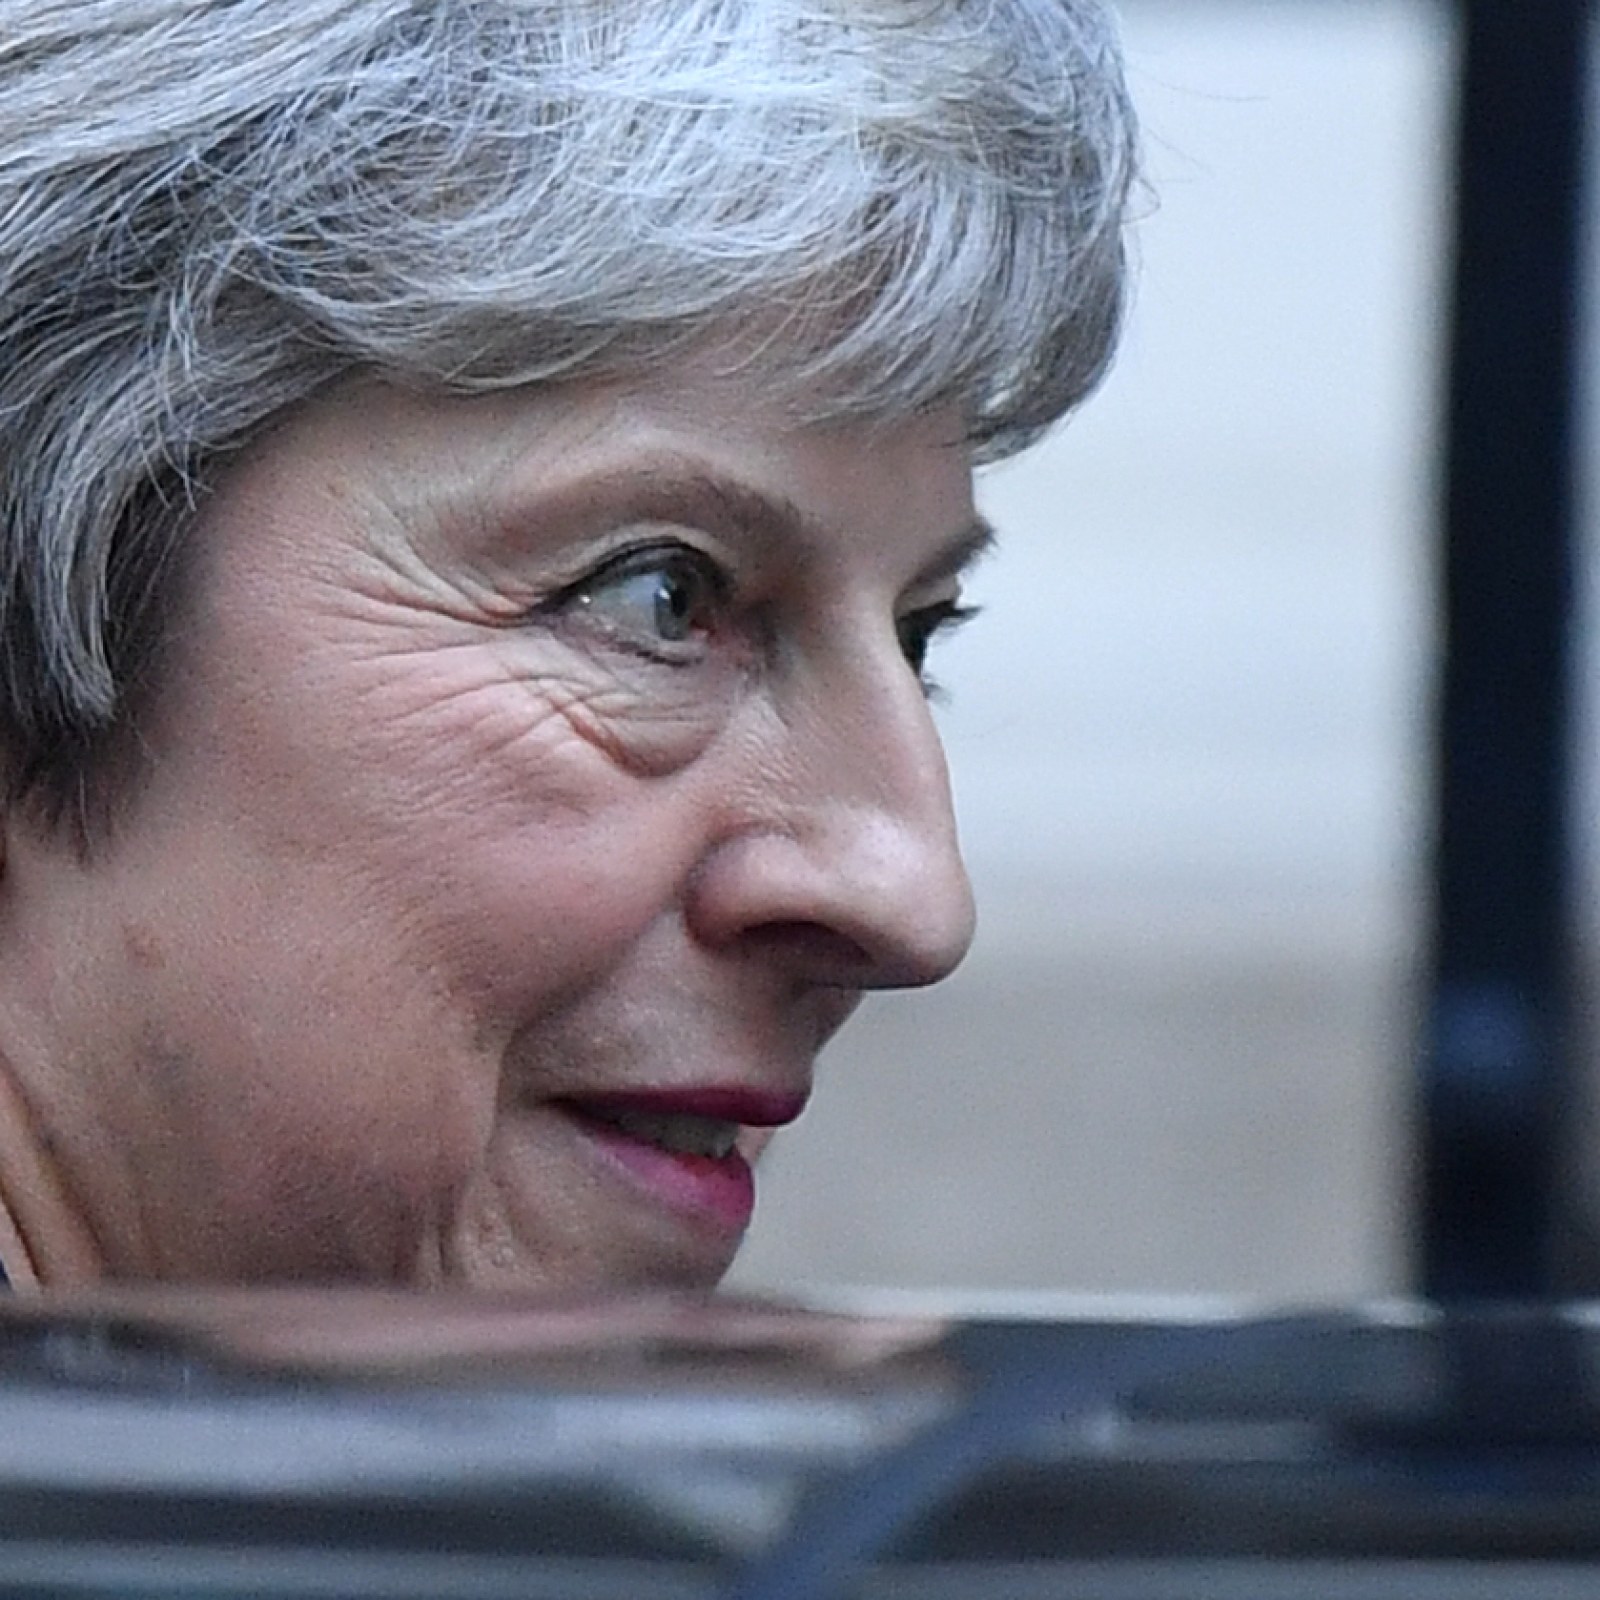 The Brexit breakthrough: Theresa May's Cabinet back historic divorce deal  from European Union